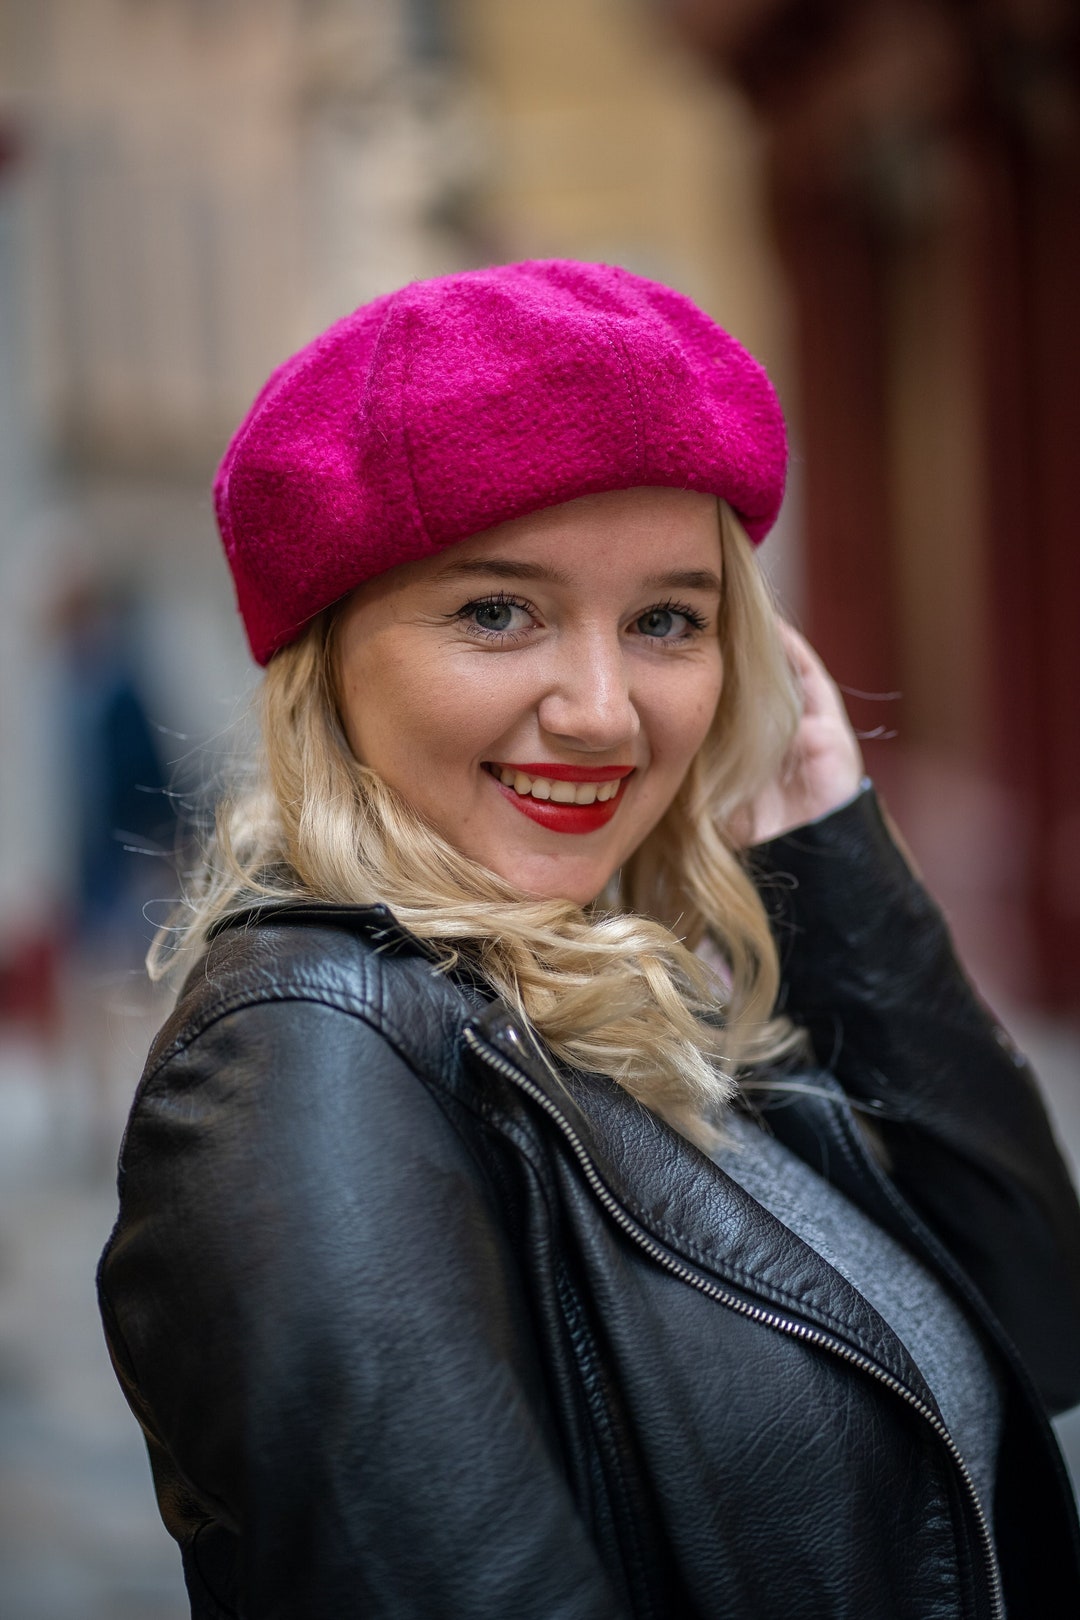 Fuchsia Pink Beret Hat, a Cute French Beret for Women. A Unique Fabric ...